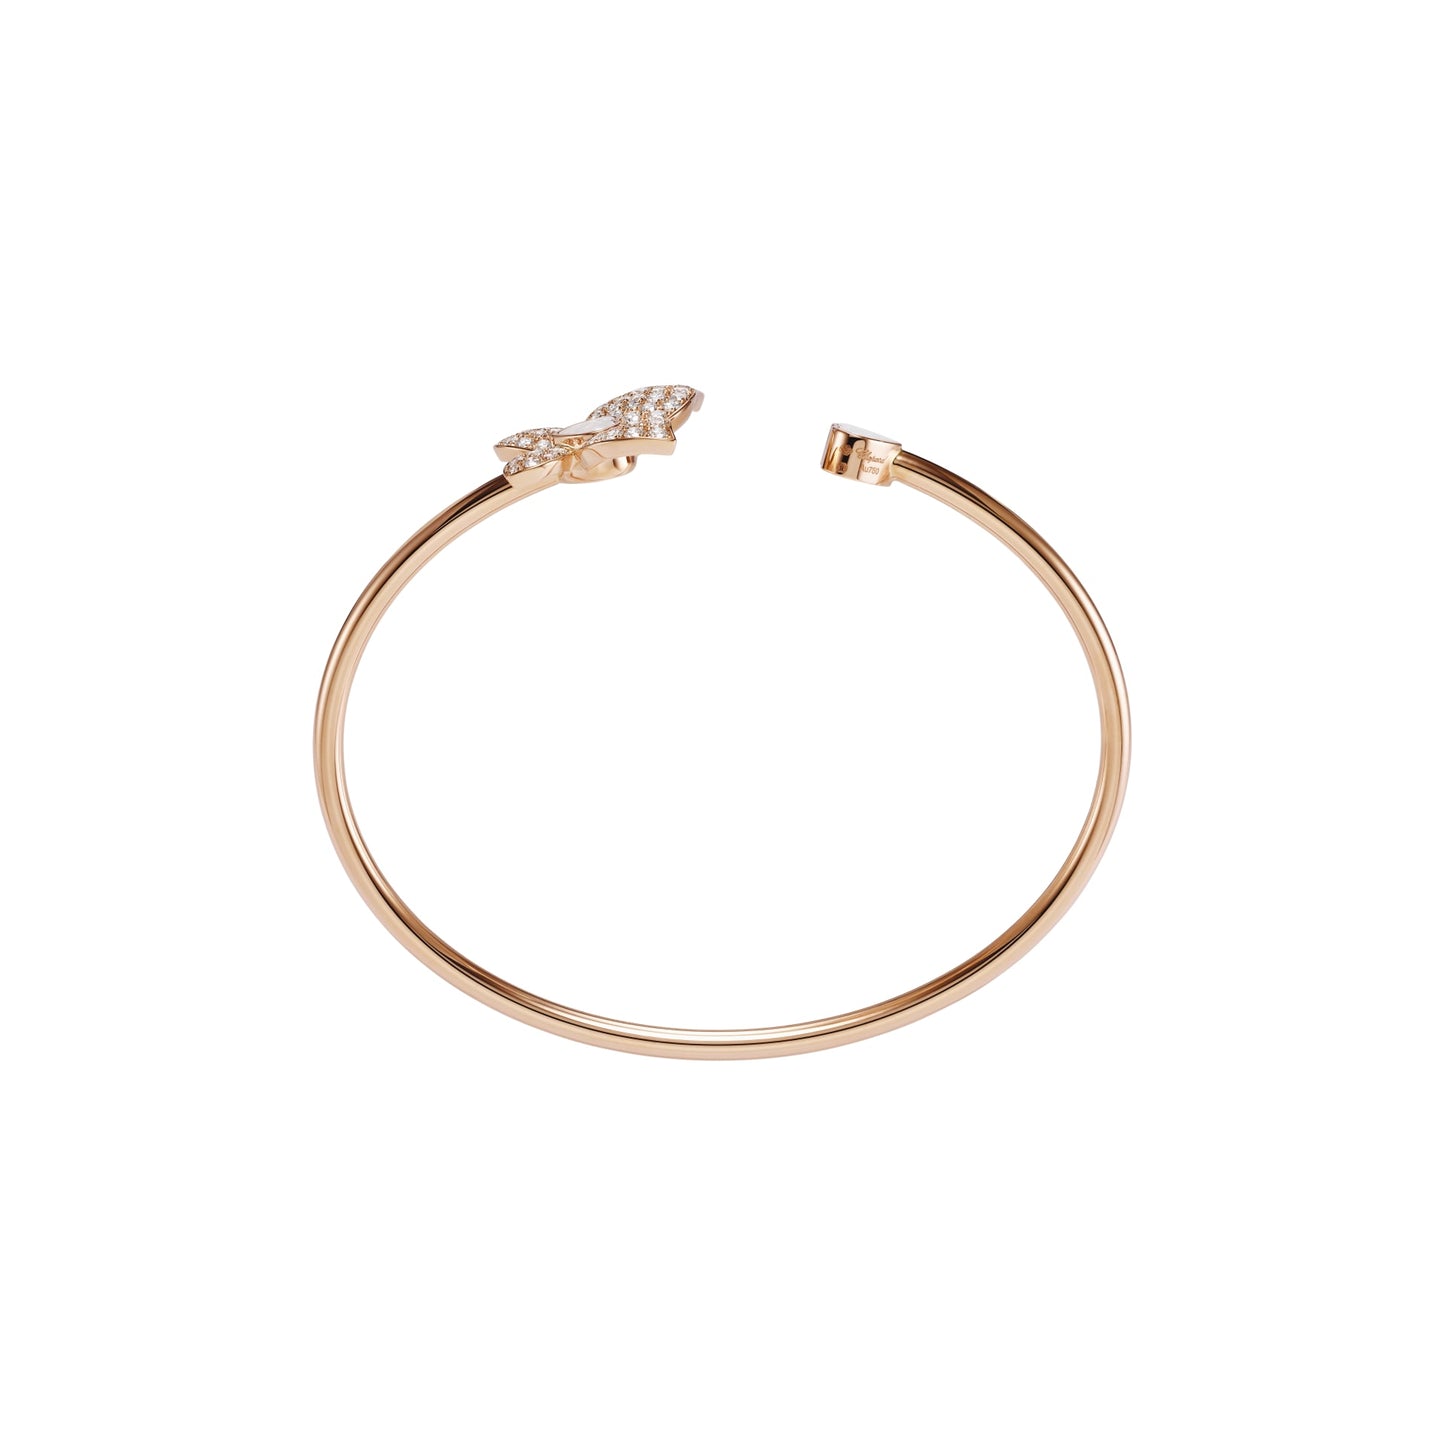 HAPPY BUTTERFLY X MARIAH CAREY BANGLE, ETHICAL ROSE GOLD, DIAMONDS 858536-5002